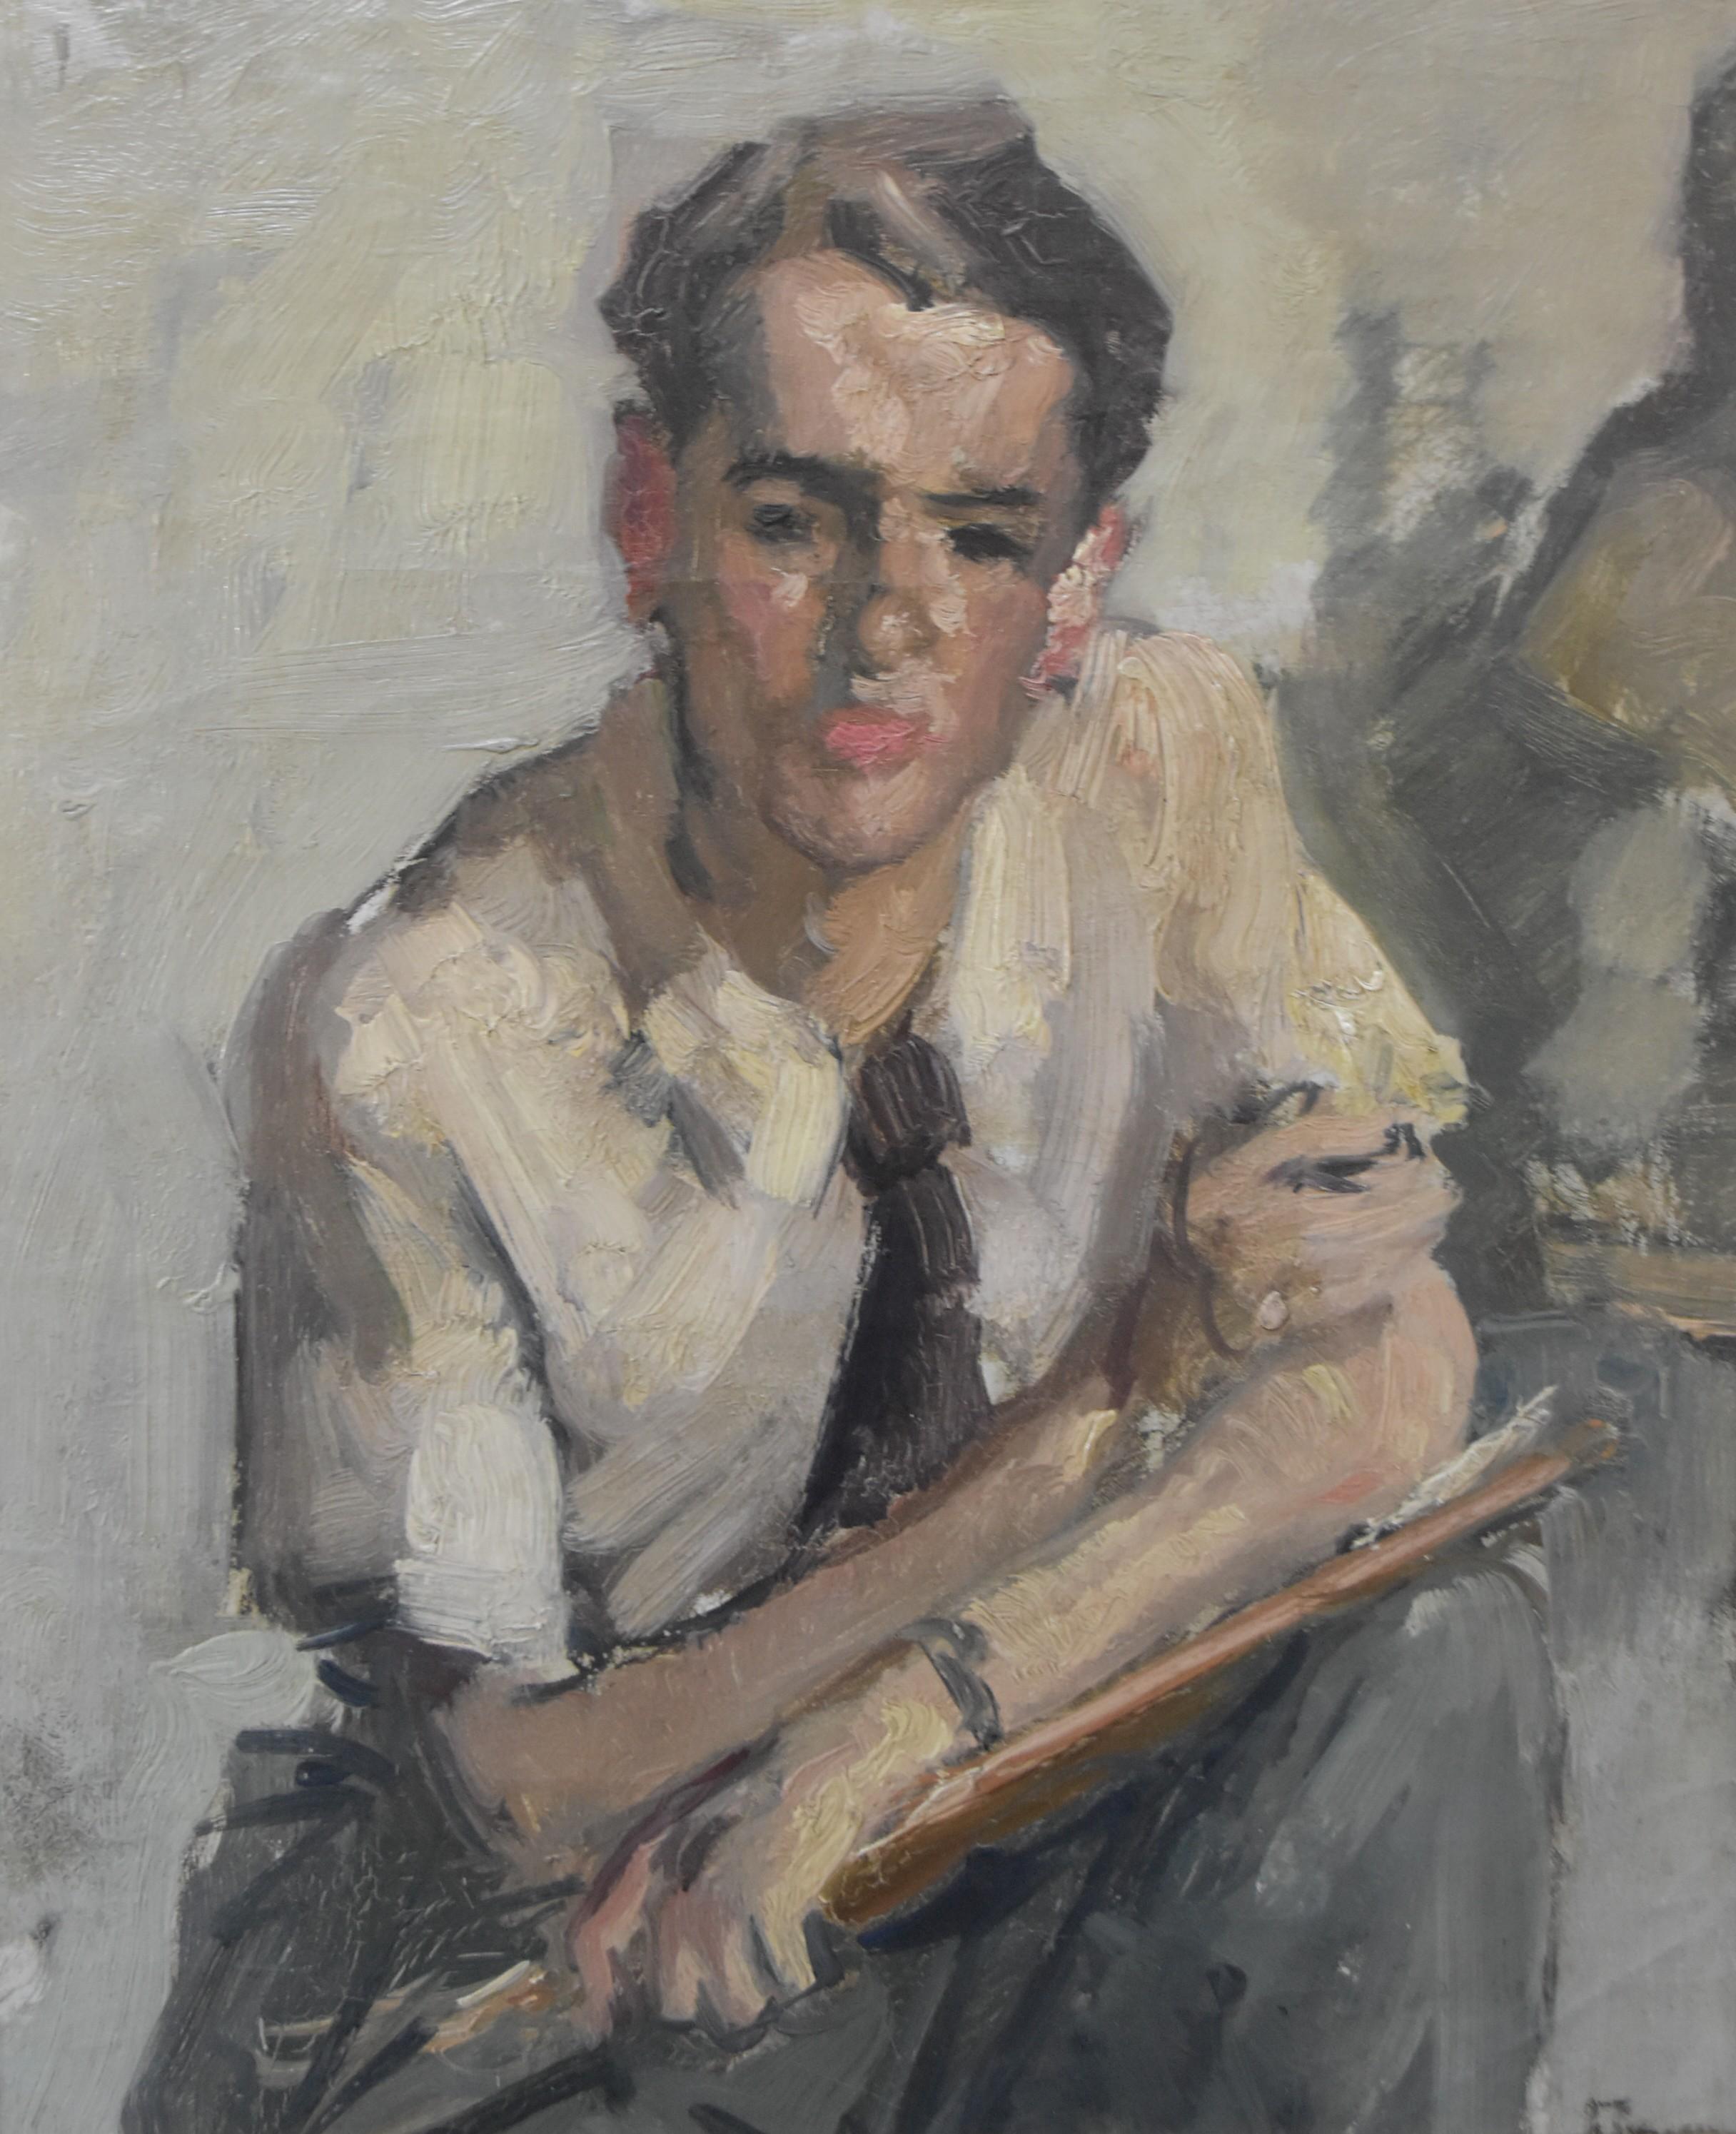 Frans Smeers (1873-1960) 
Portrait of an artist, 
signed lower right (partially hidden by the frame)
42.5 x 36 cm
Framed : 50 x 43.5 cm

This work is typical of Smeers' post-impressionist style, as found in his famous beach scenes for example. 
It